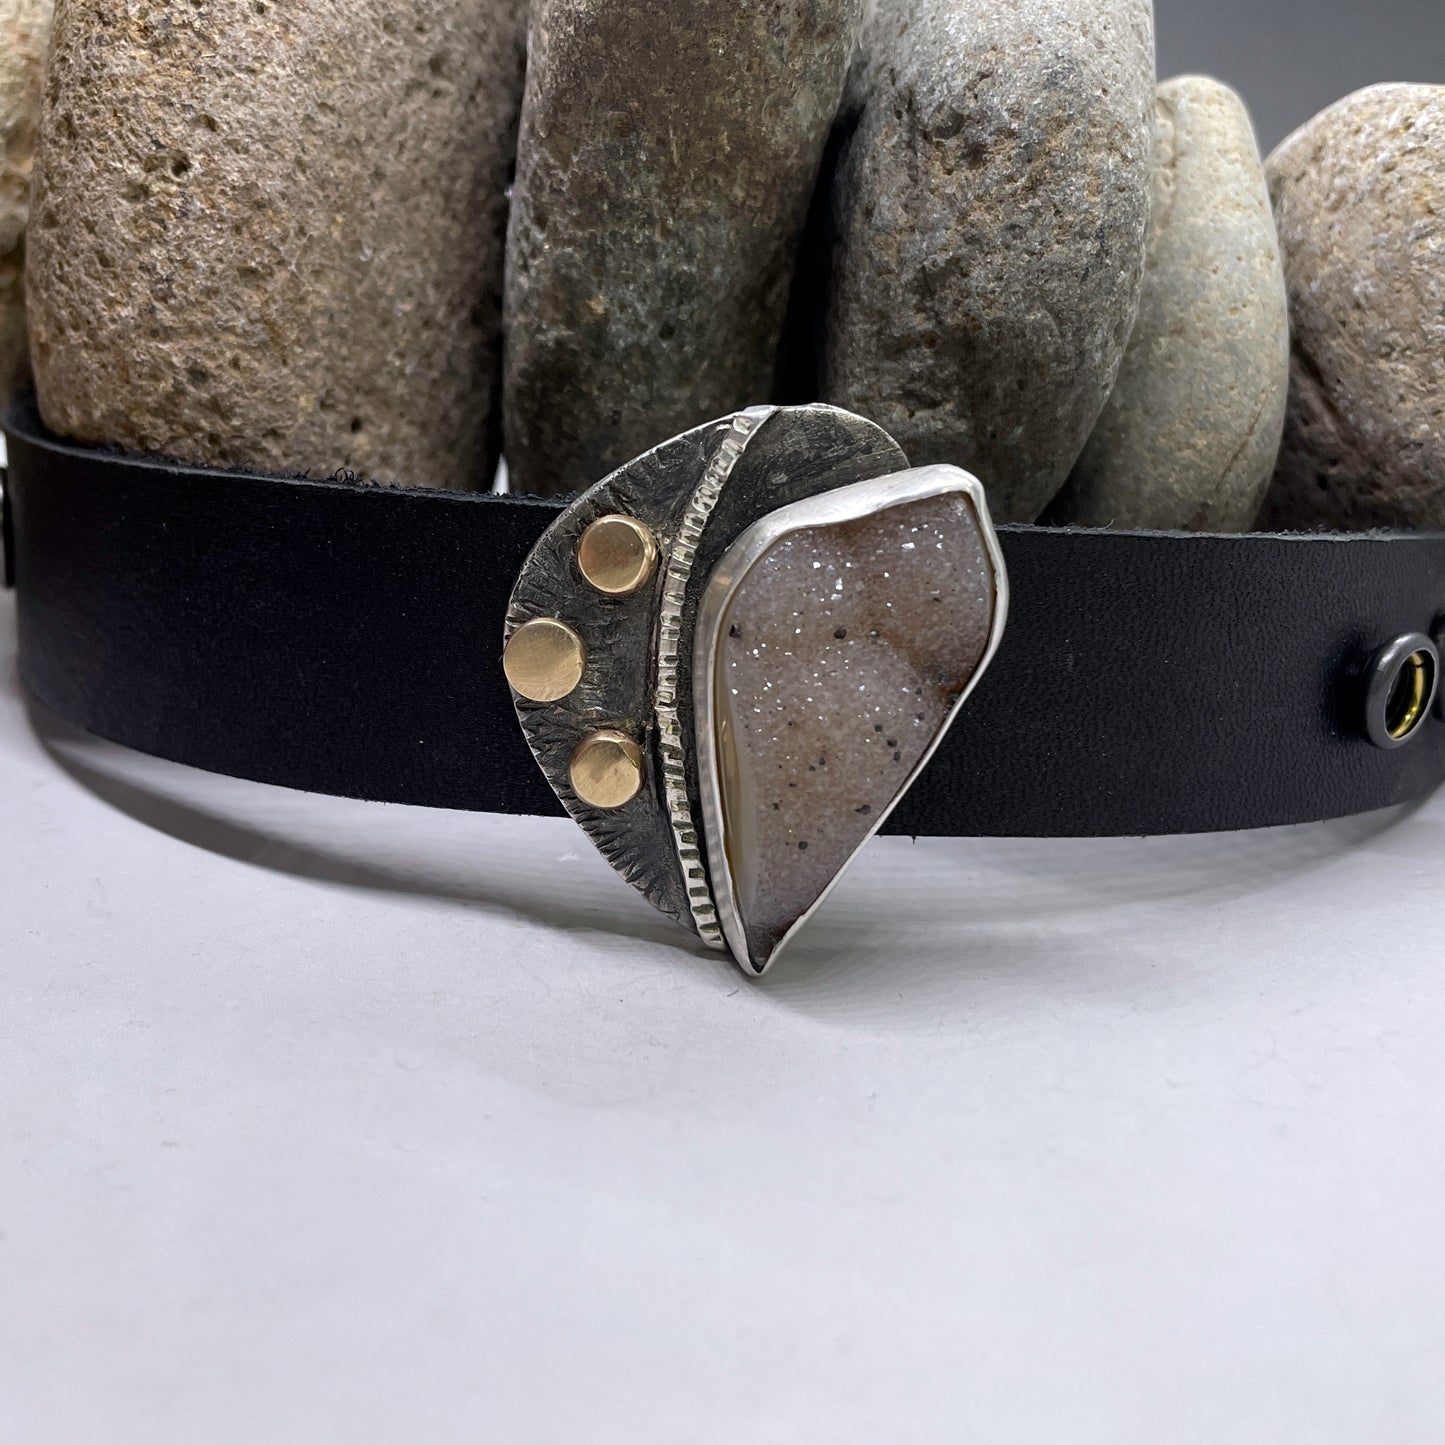 Sterling Silver with Druzy Quartz and Bronze Leather Cuff